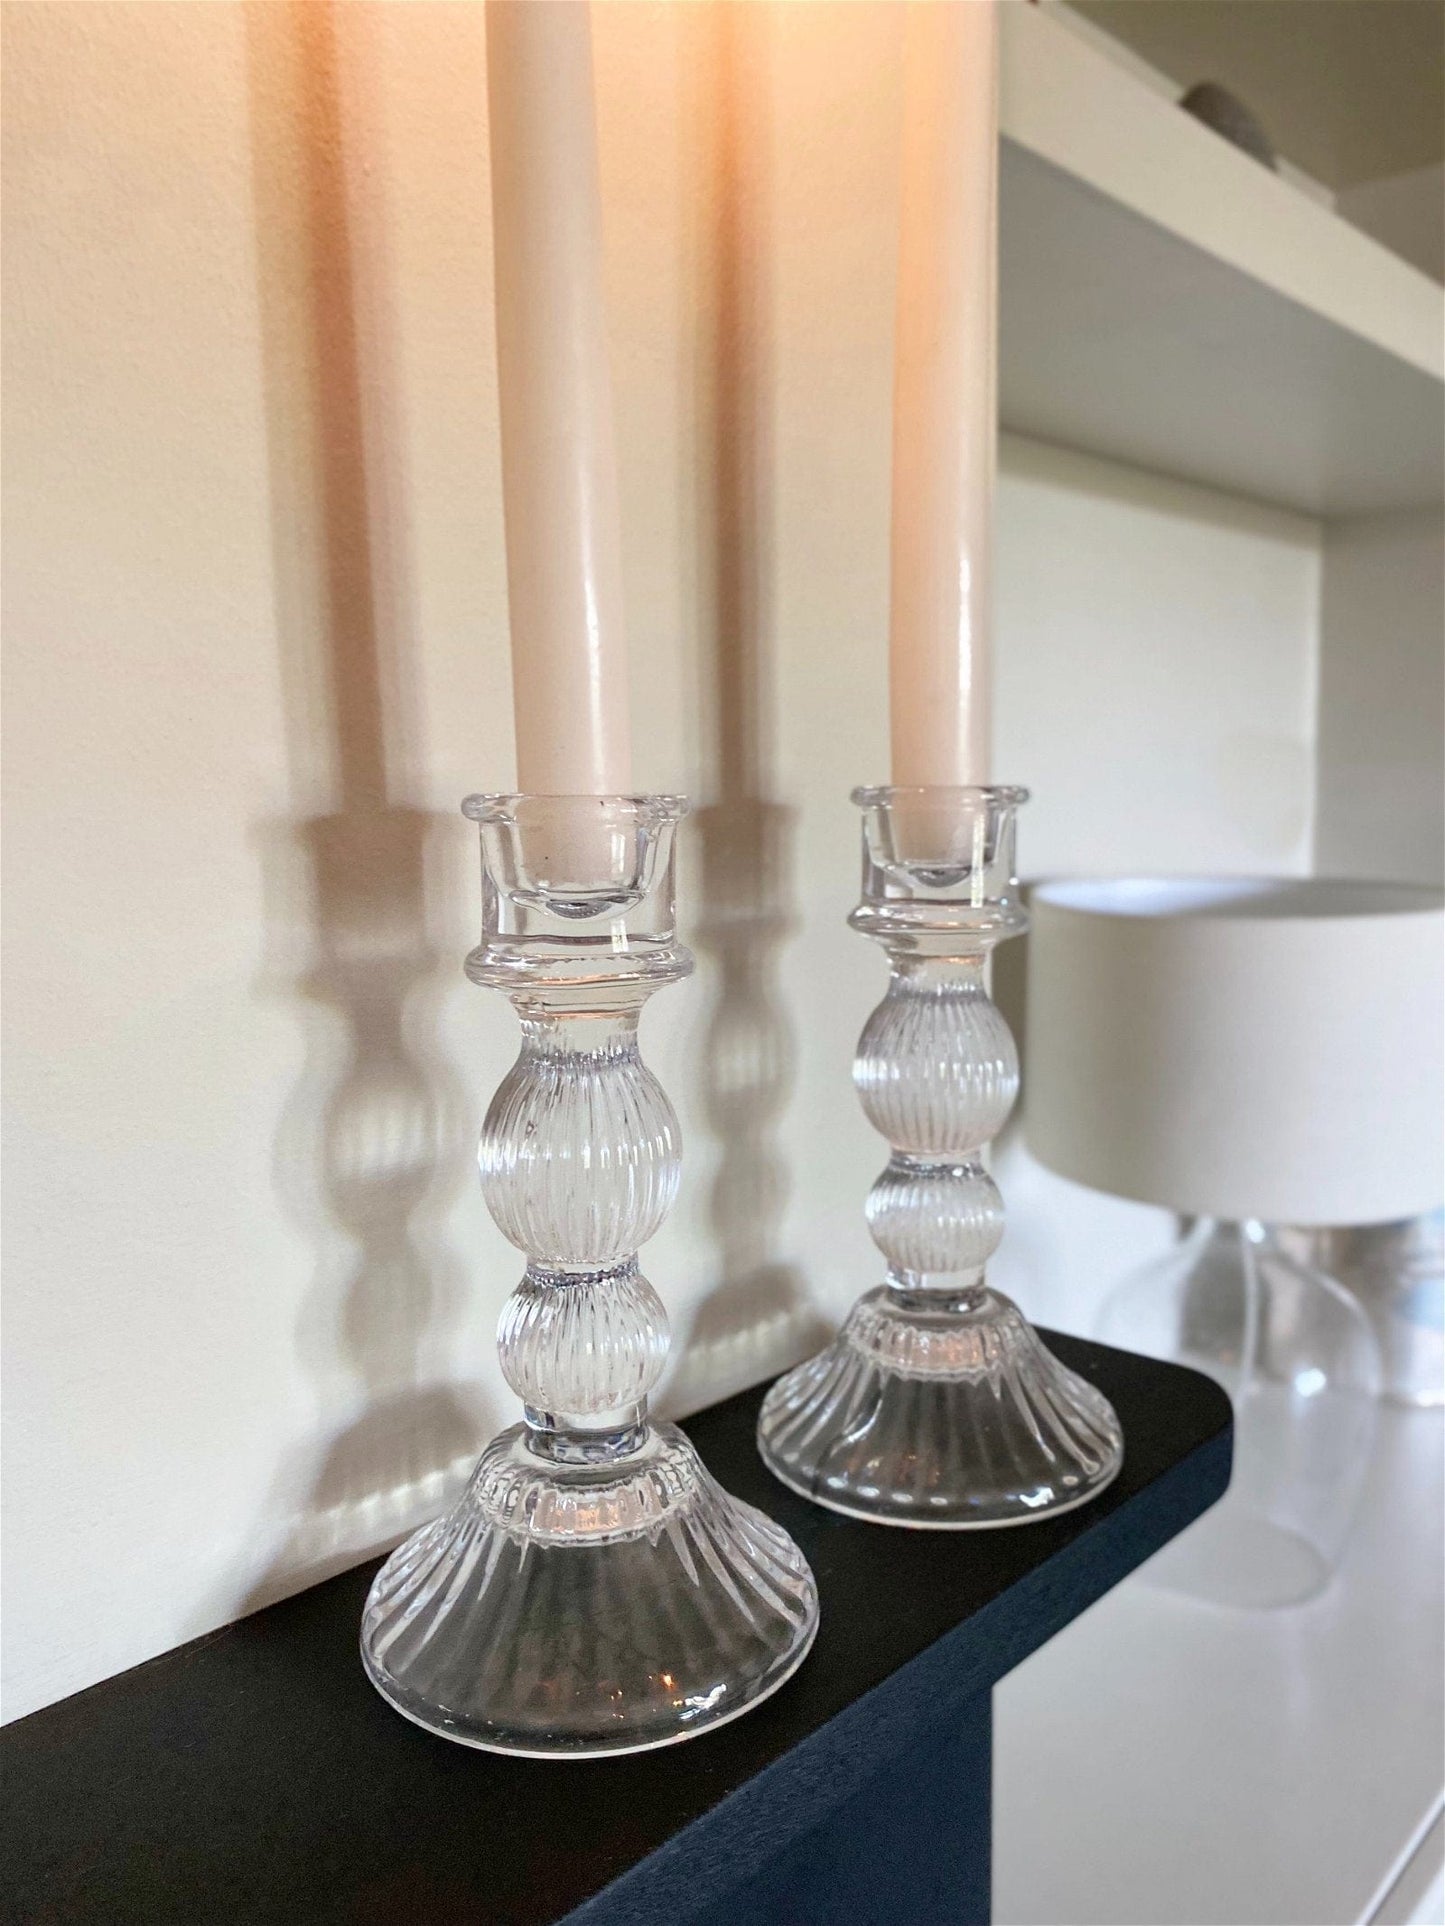 Pair of Glass Taper Candle Holders Clear - Kaftan direct